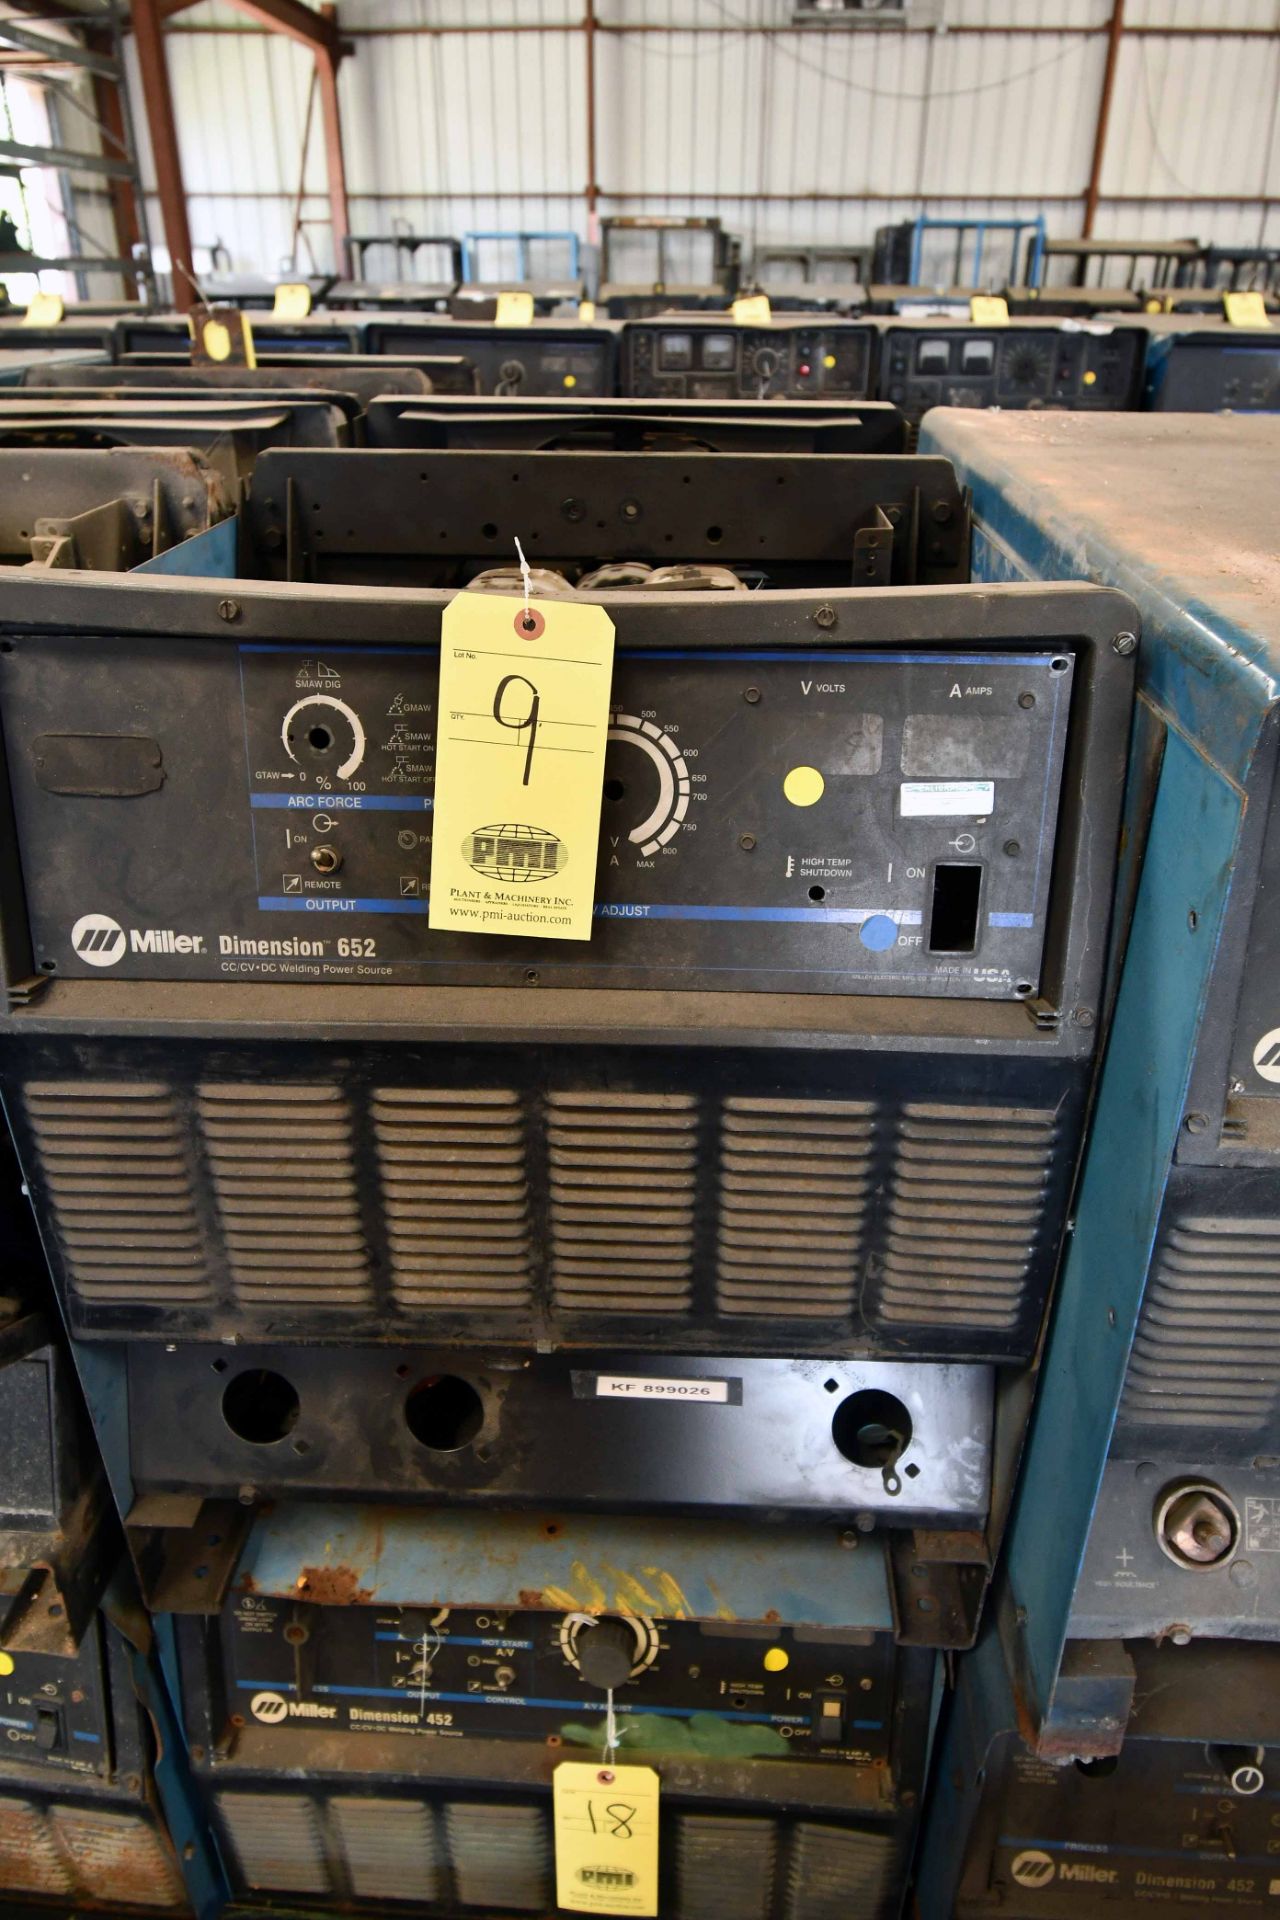 WELDING POWER SOURCE, MILLER DIMENSION 652, new 1995, 575 v., 50 amp @ 100% duty cycle, S/N KF899026